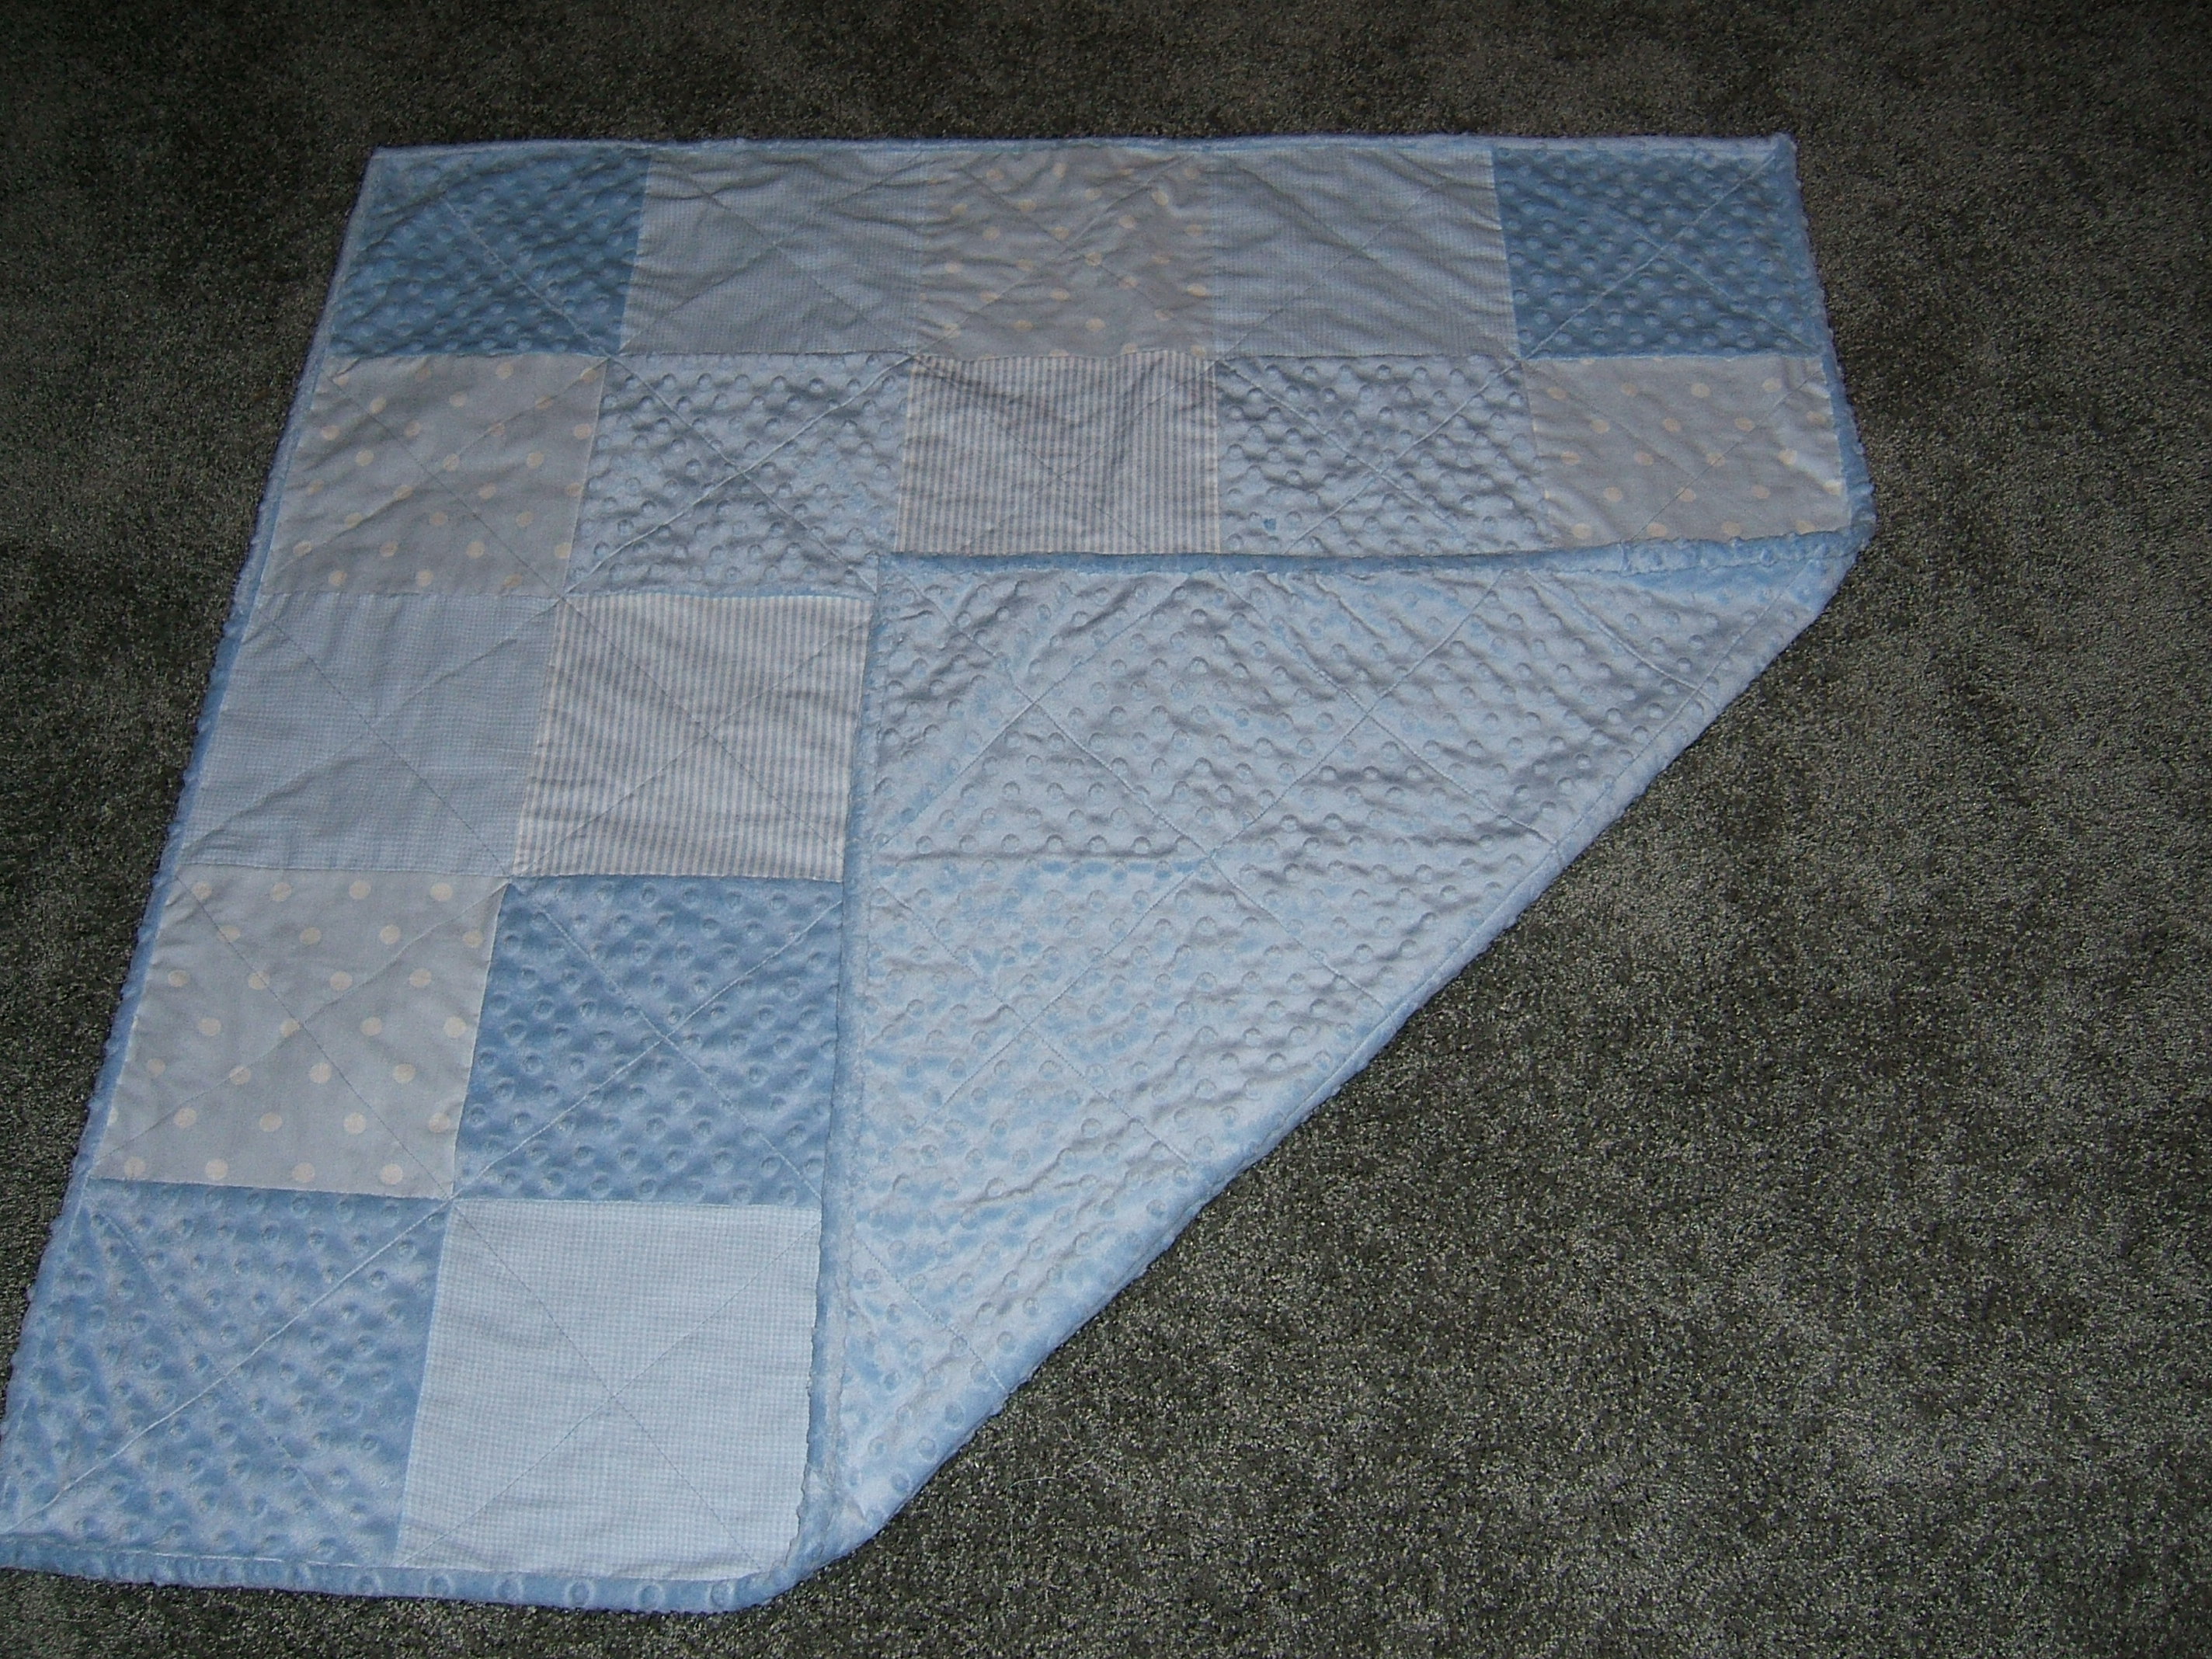 Baby Rooms by Nana, May Seibolt, Custom Embroidery and Quilting